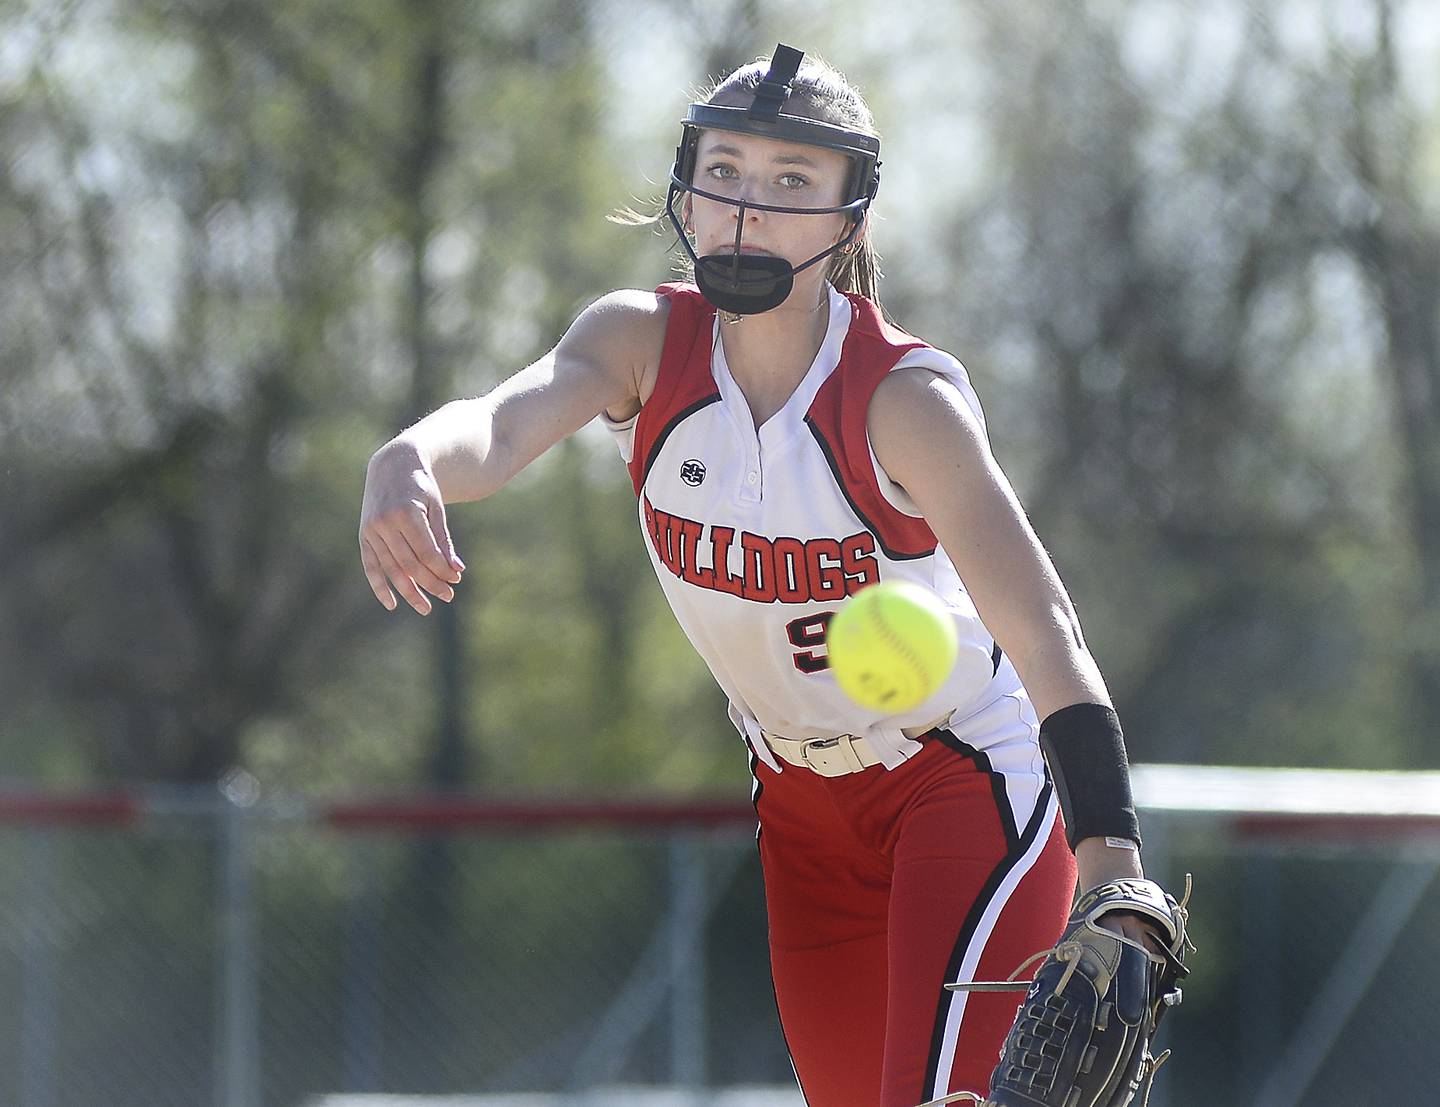 Streator starting pitcher Makenna Ondrey lets go with a pitch Tuesday in a game against Coal City on Tuesday, April 18, 2023 at Streator High School.